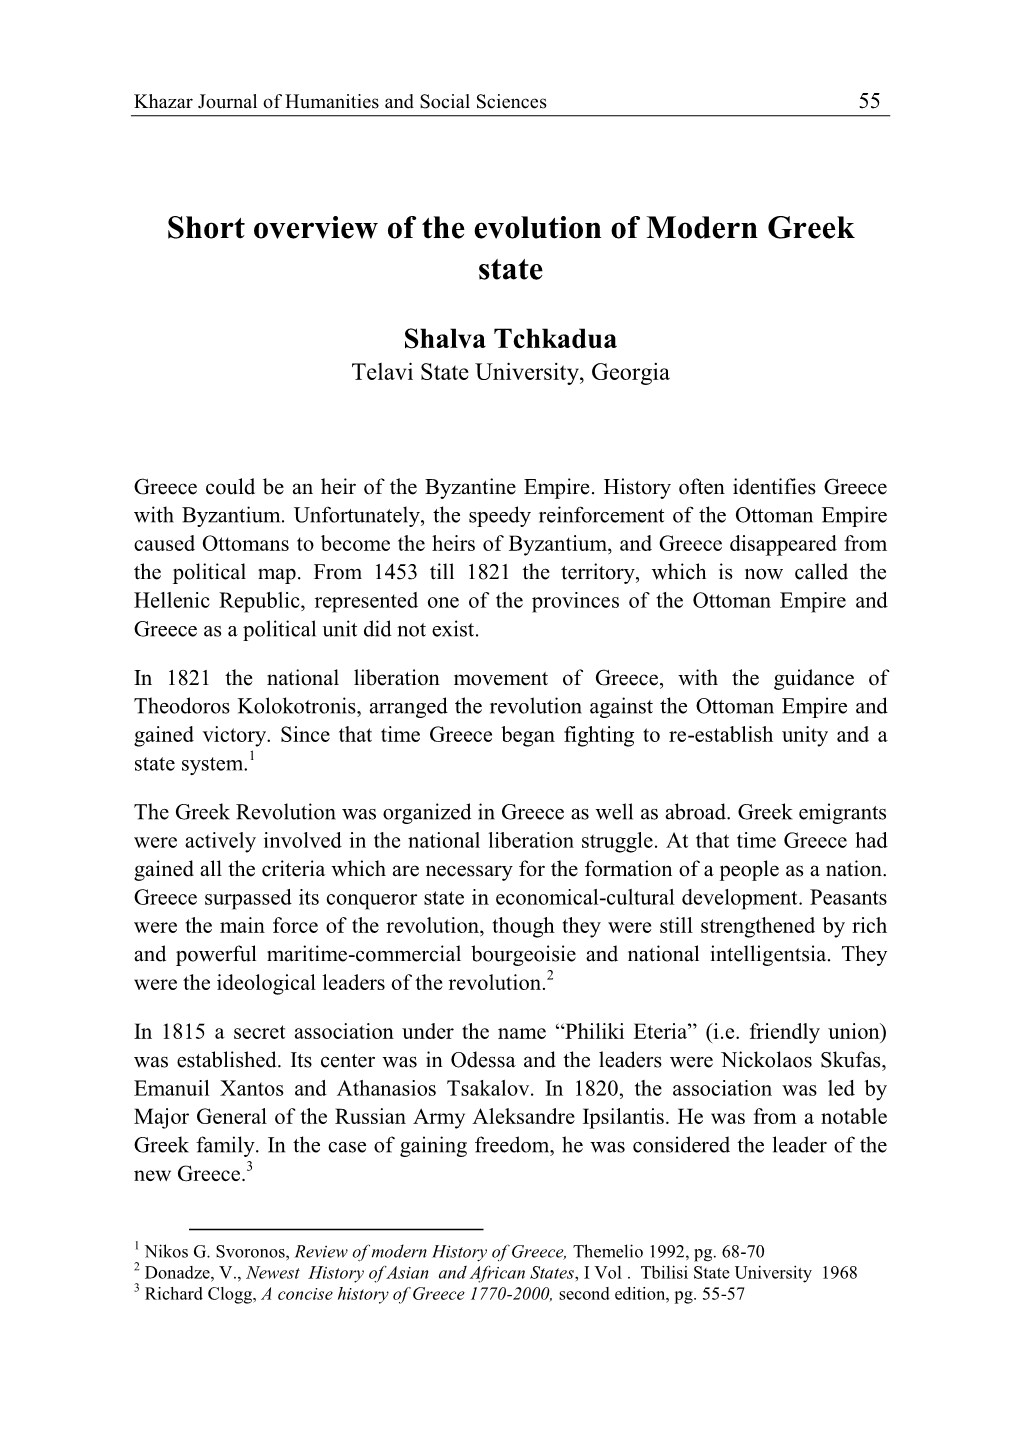 Short Overview of the Evolution of Modern Greek State